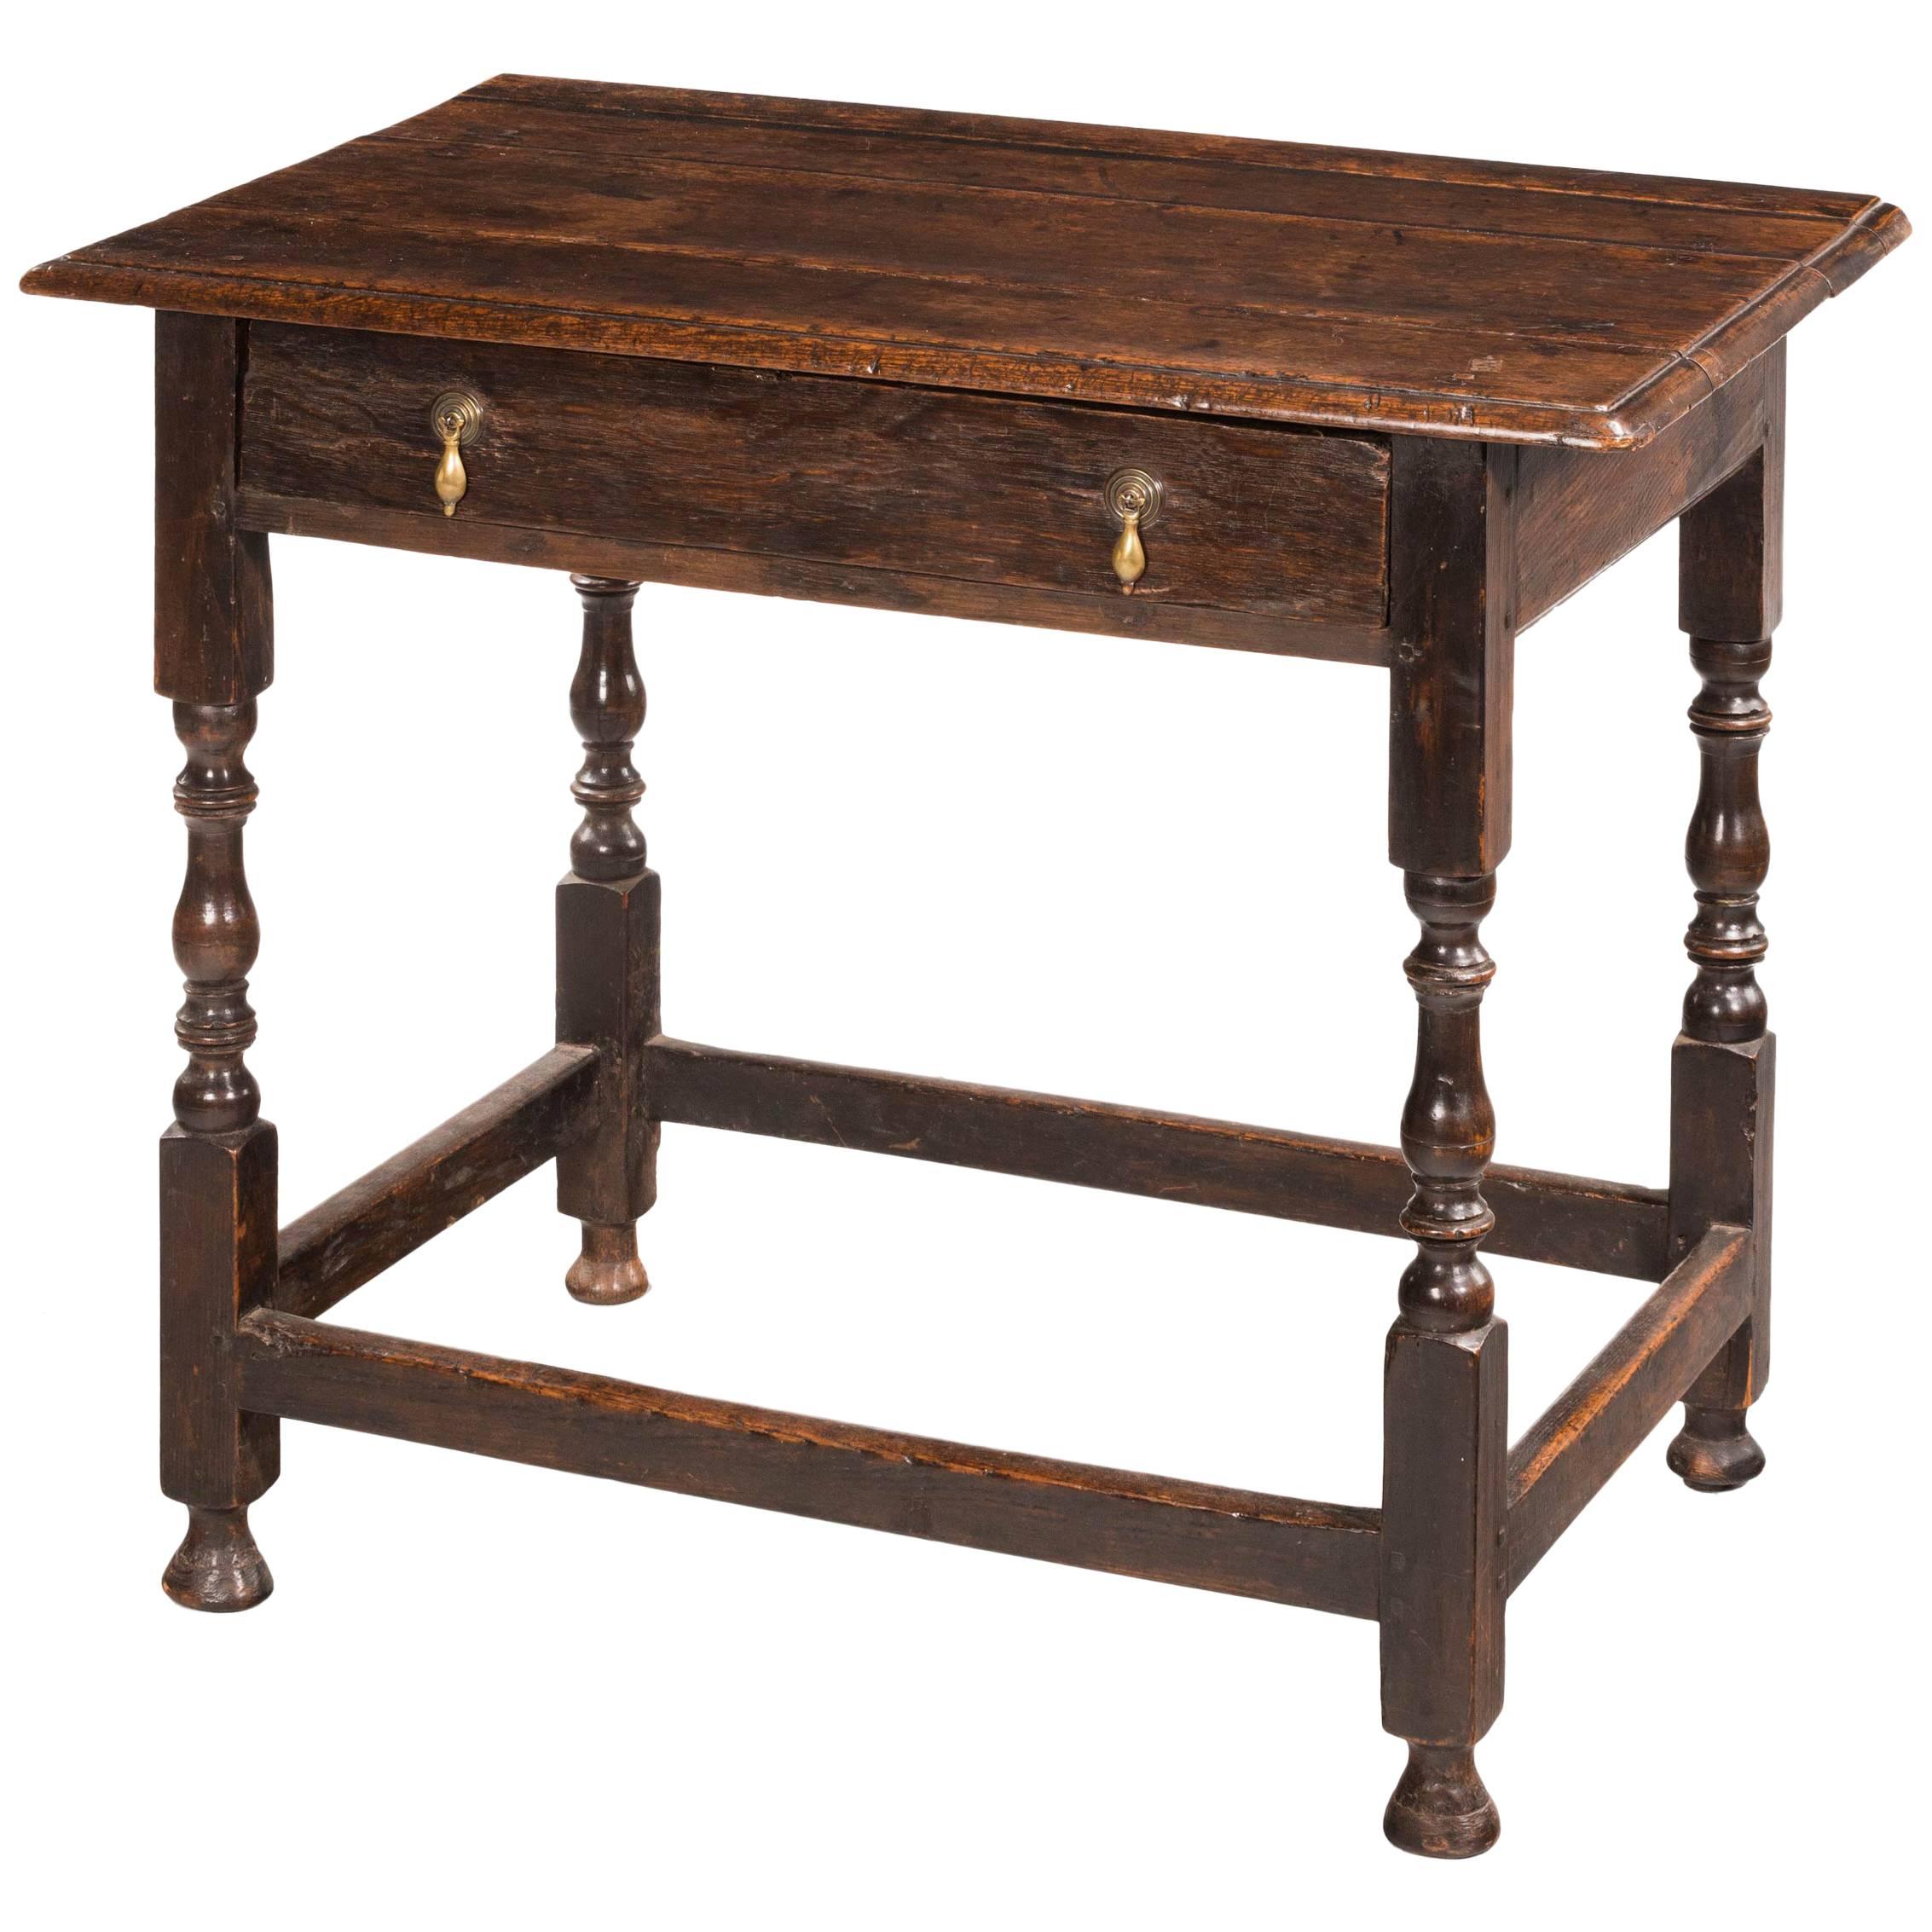 Early 18th Century Side Table Incorporating a Single Drawer